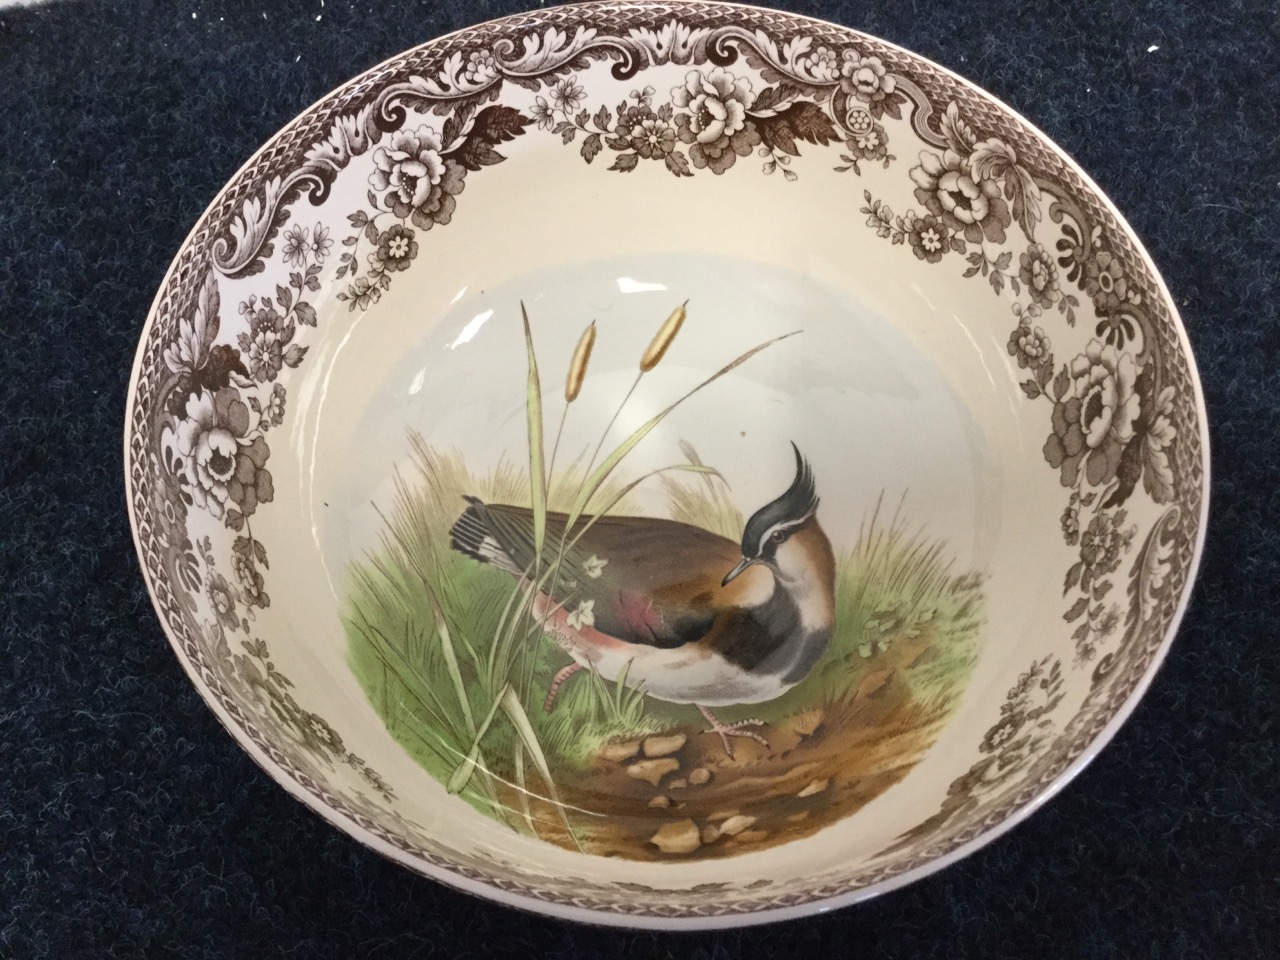 A nineteenth century Davenport plate painted with a country river landscape scene, with floral - Image 2 of 3